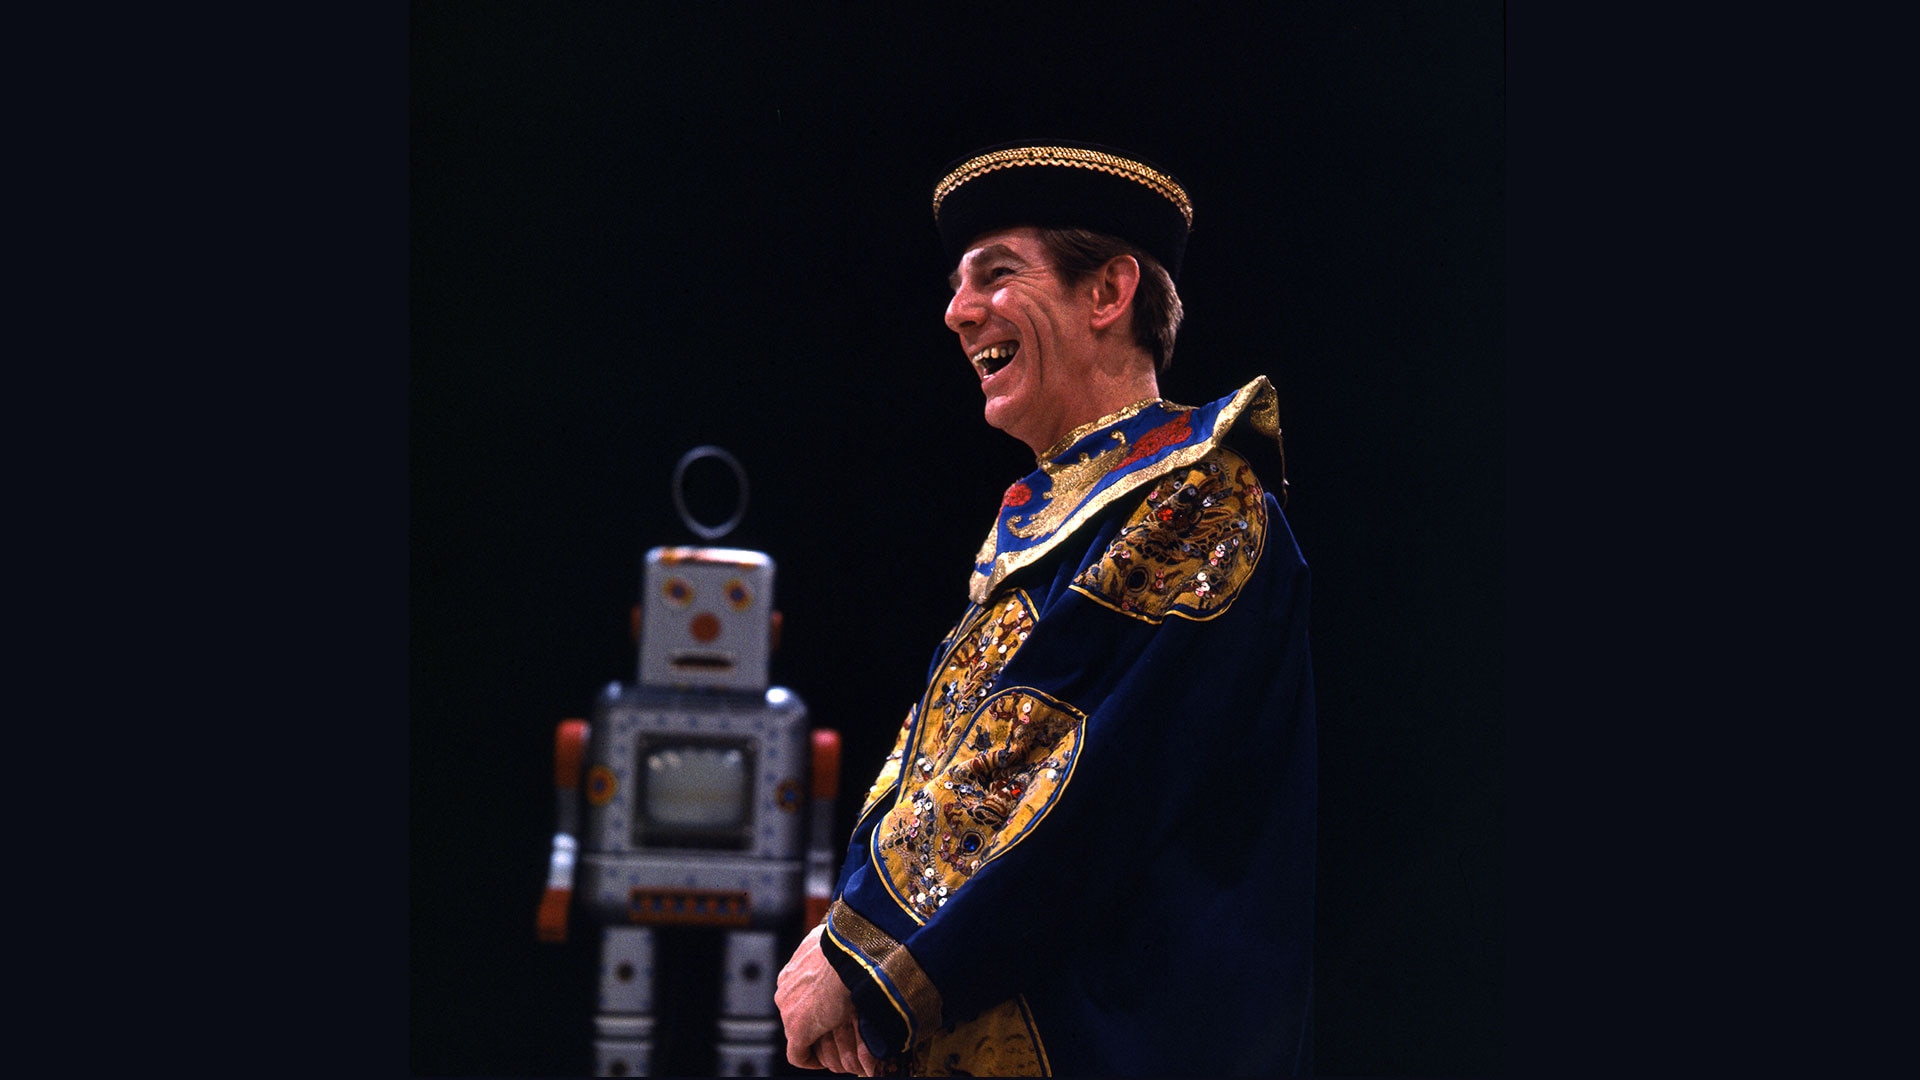 The Toymaker played by Michael Gough